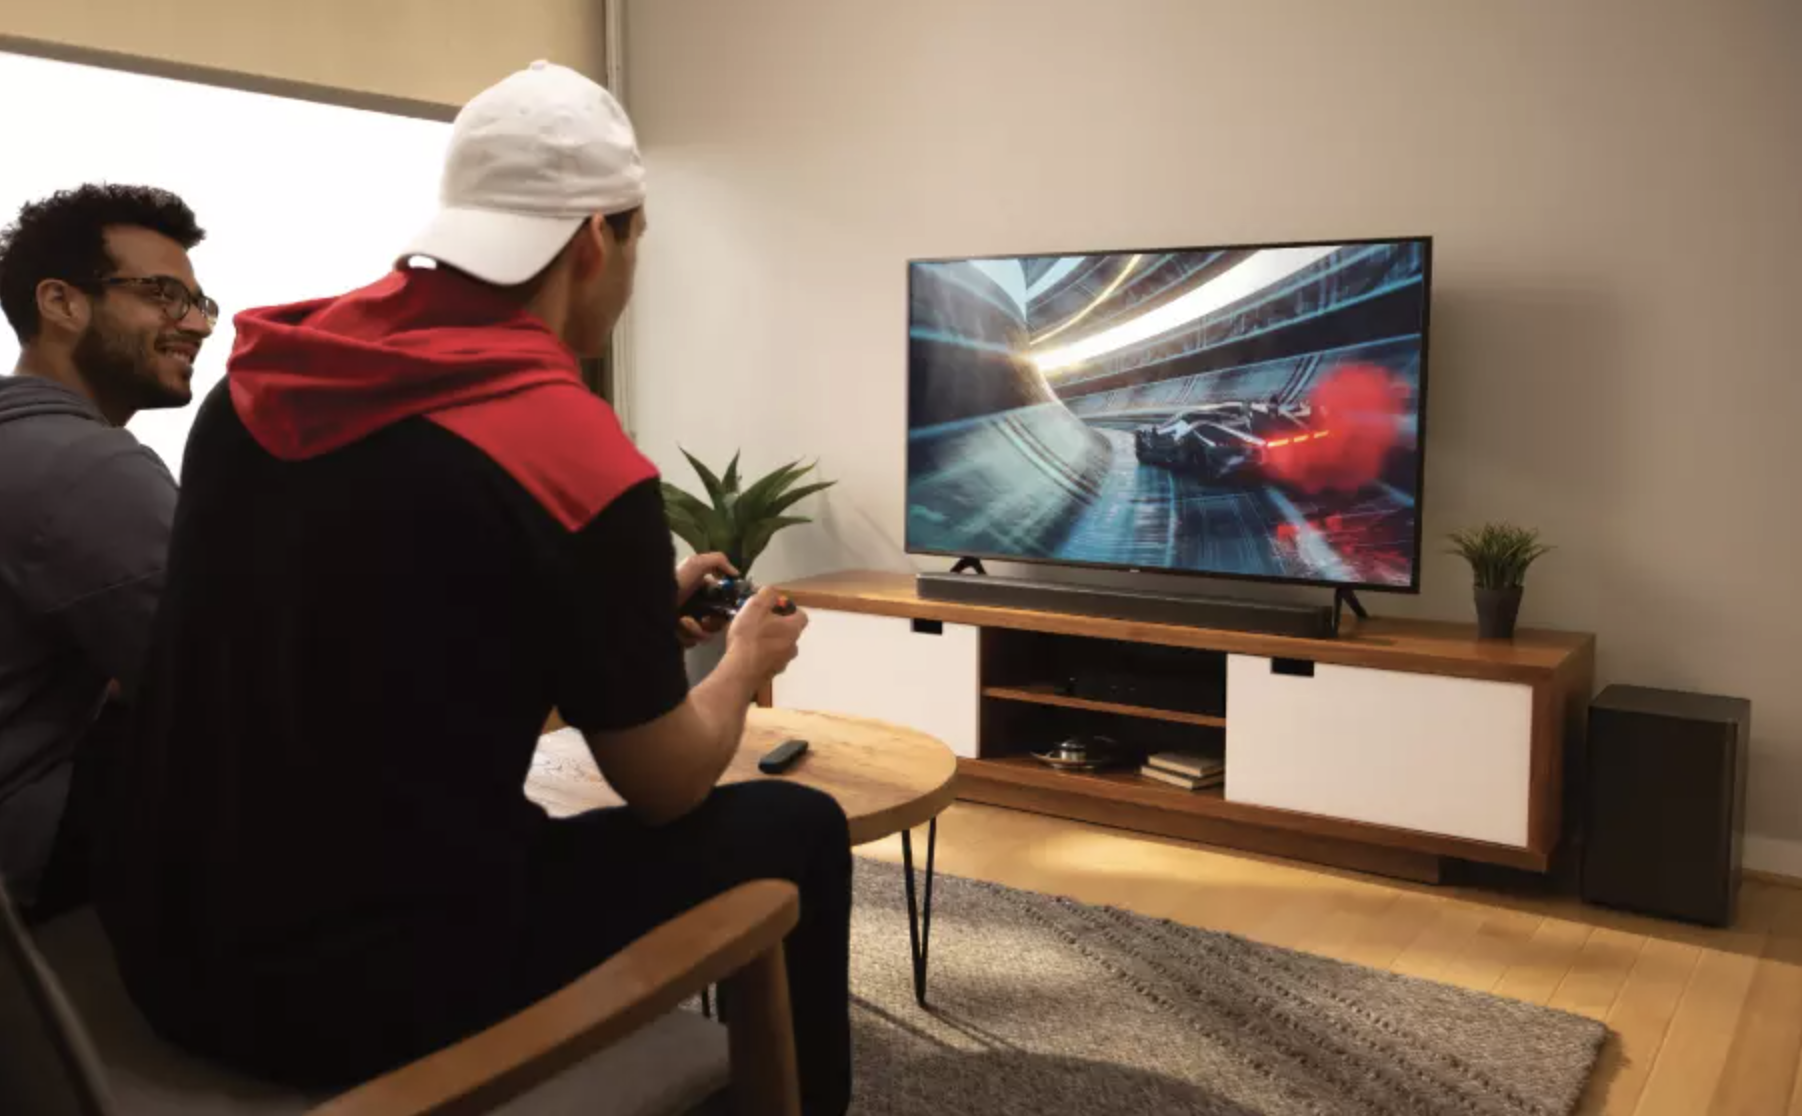 Two people playing video games on a TV connected to the subwoofer and sound bar